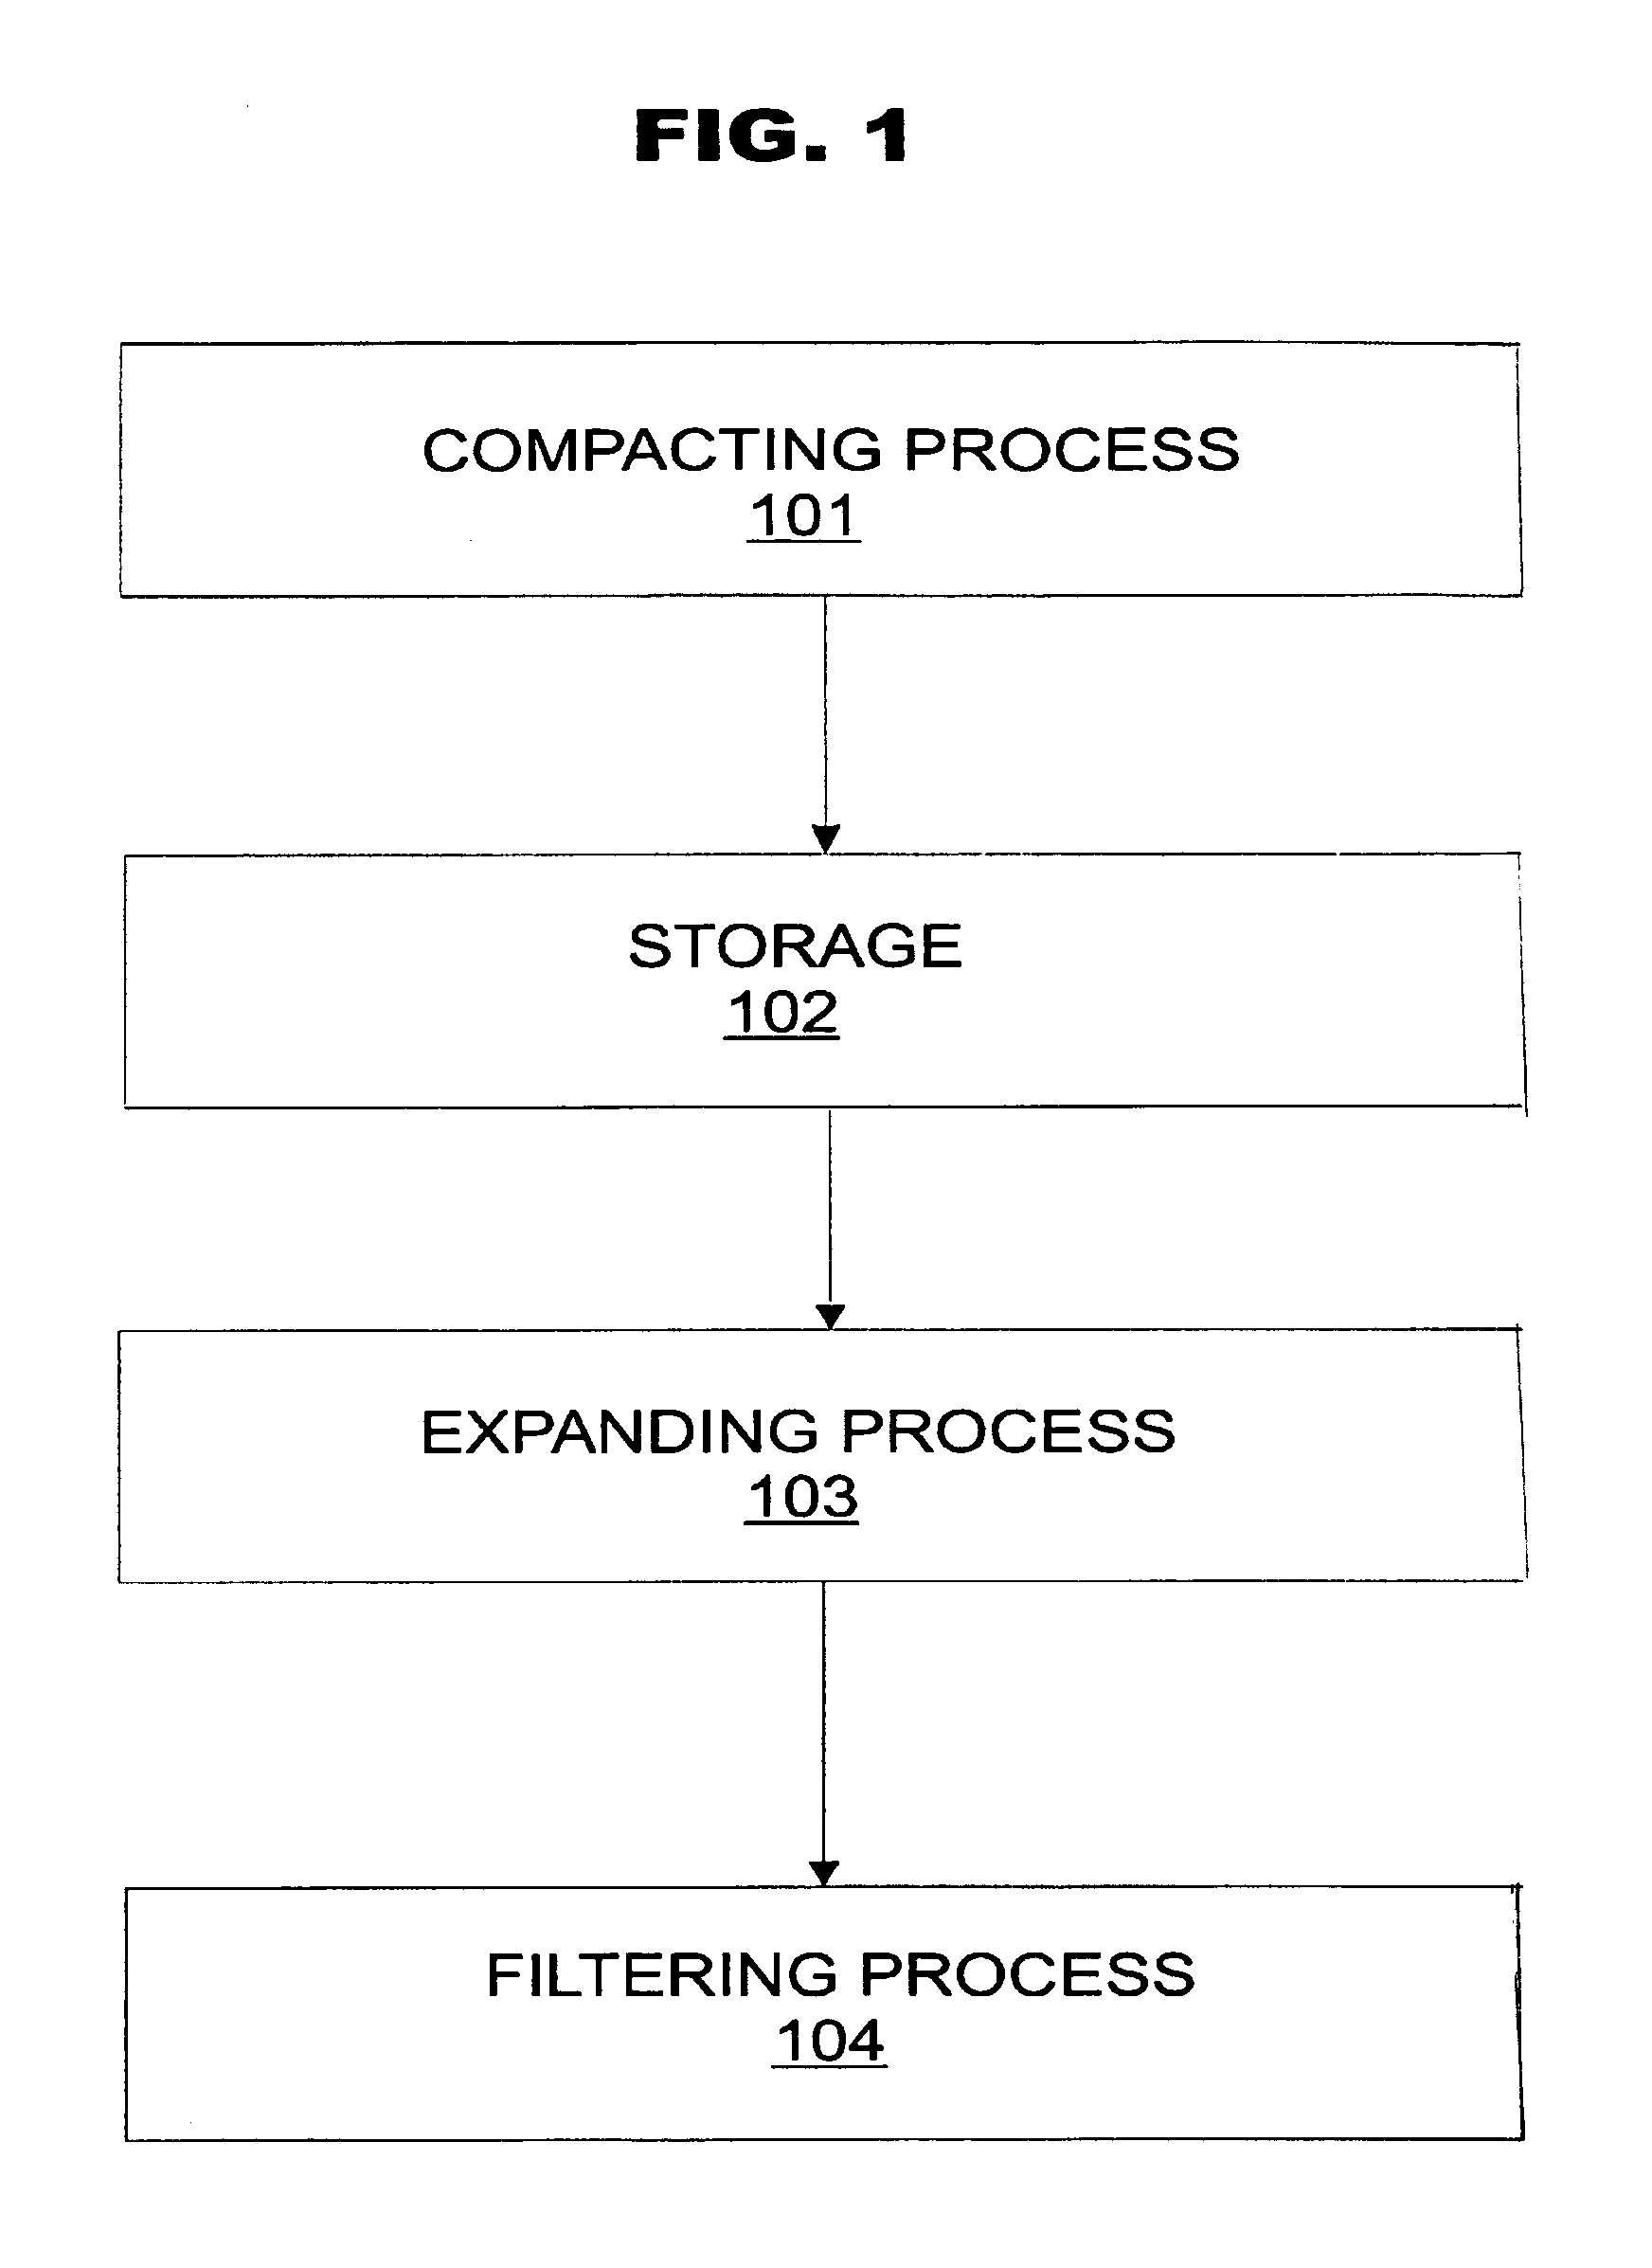 Dense and randomized storage and coding of information